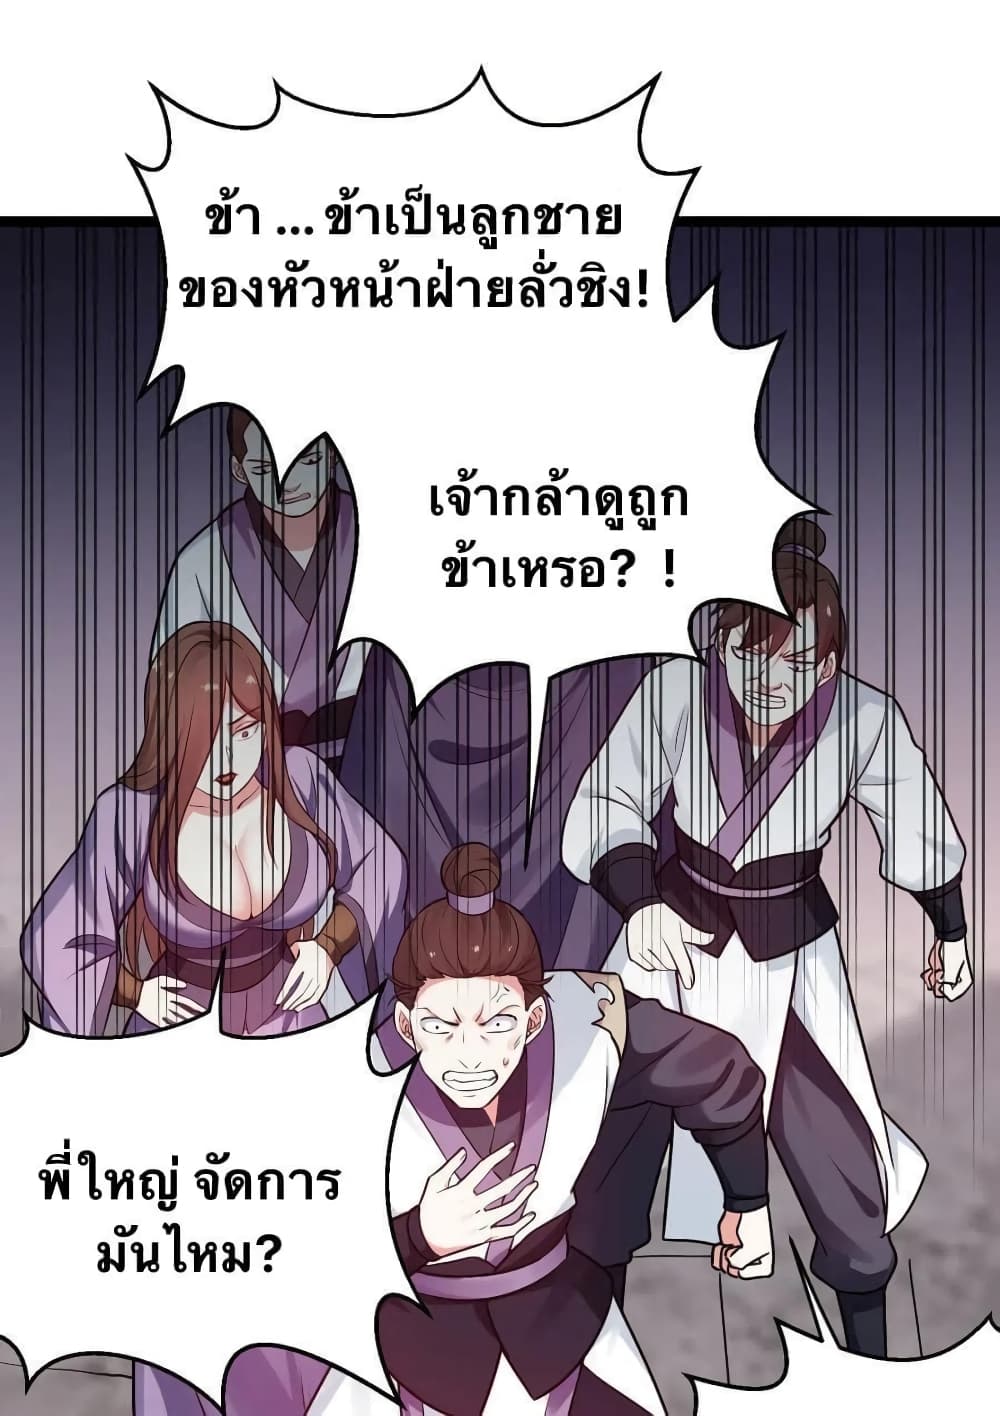 Godsian Masian from Another World 9 แปลไทย